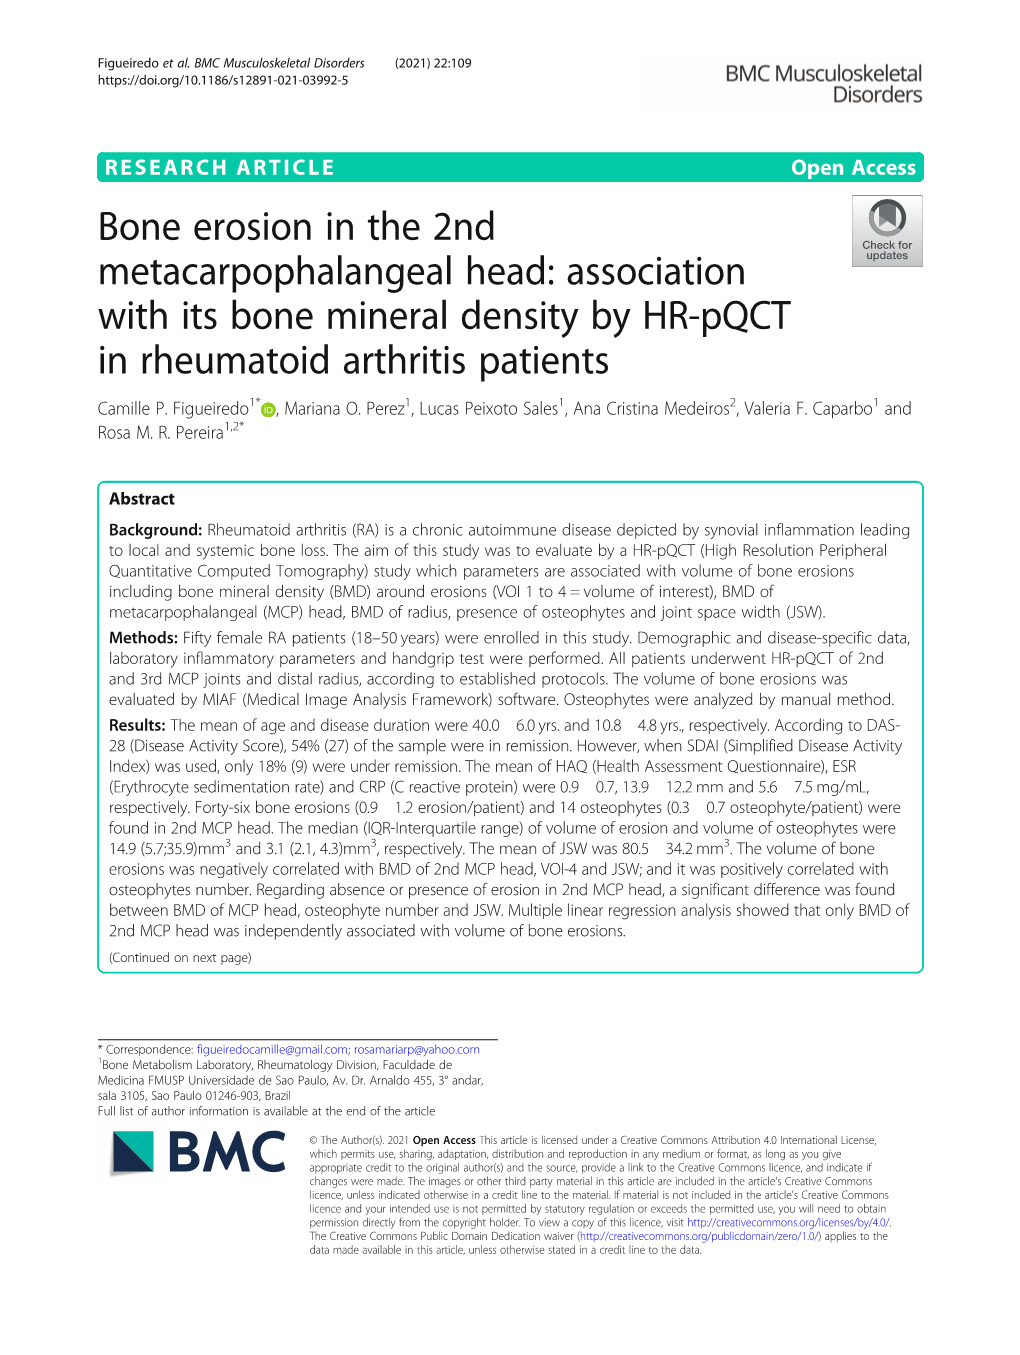 Association with Its Bone Mineral Density by HR-Pqct in Rheumatoid Arthritis Patients Camille P